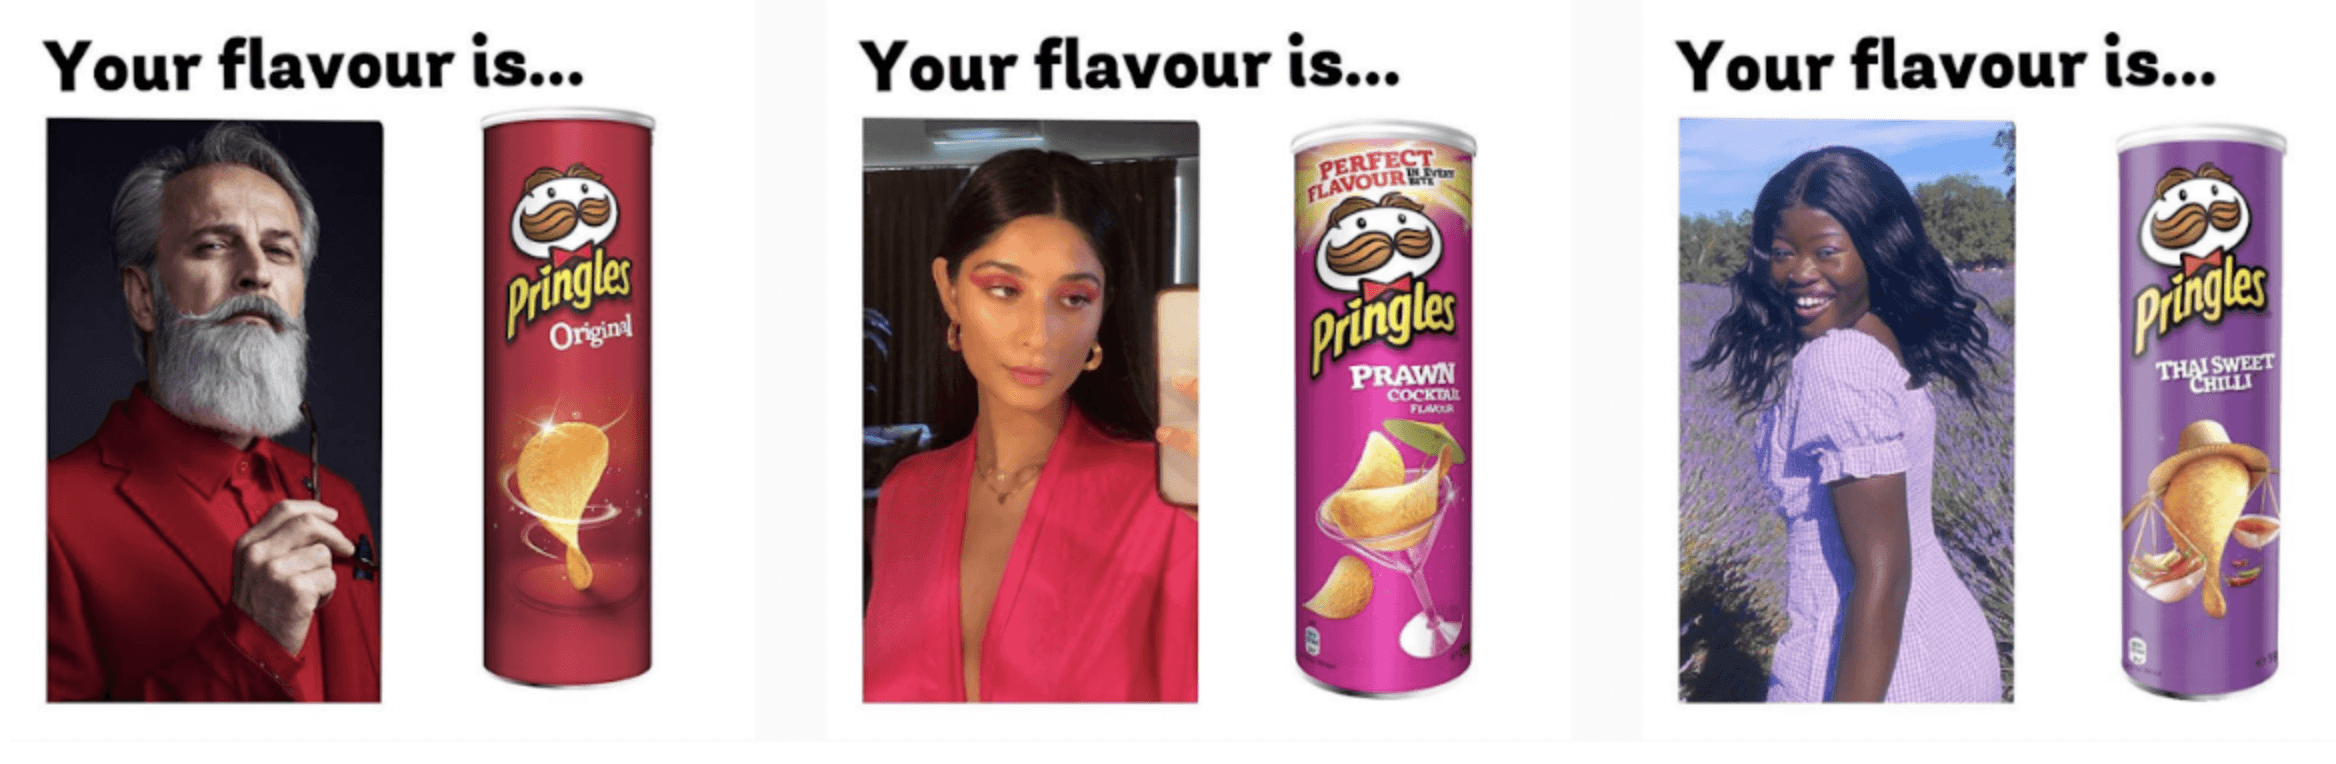 This picture shows the mechaninsm behind the Pringles challenge launched on TikTok.